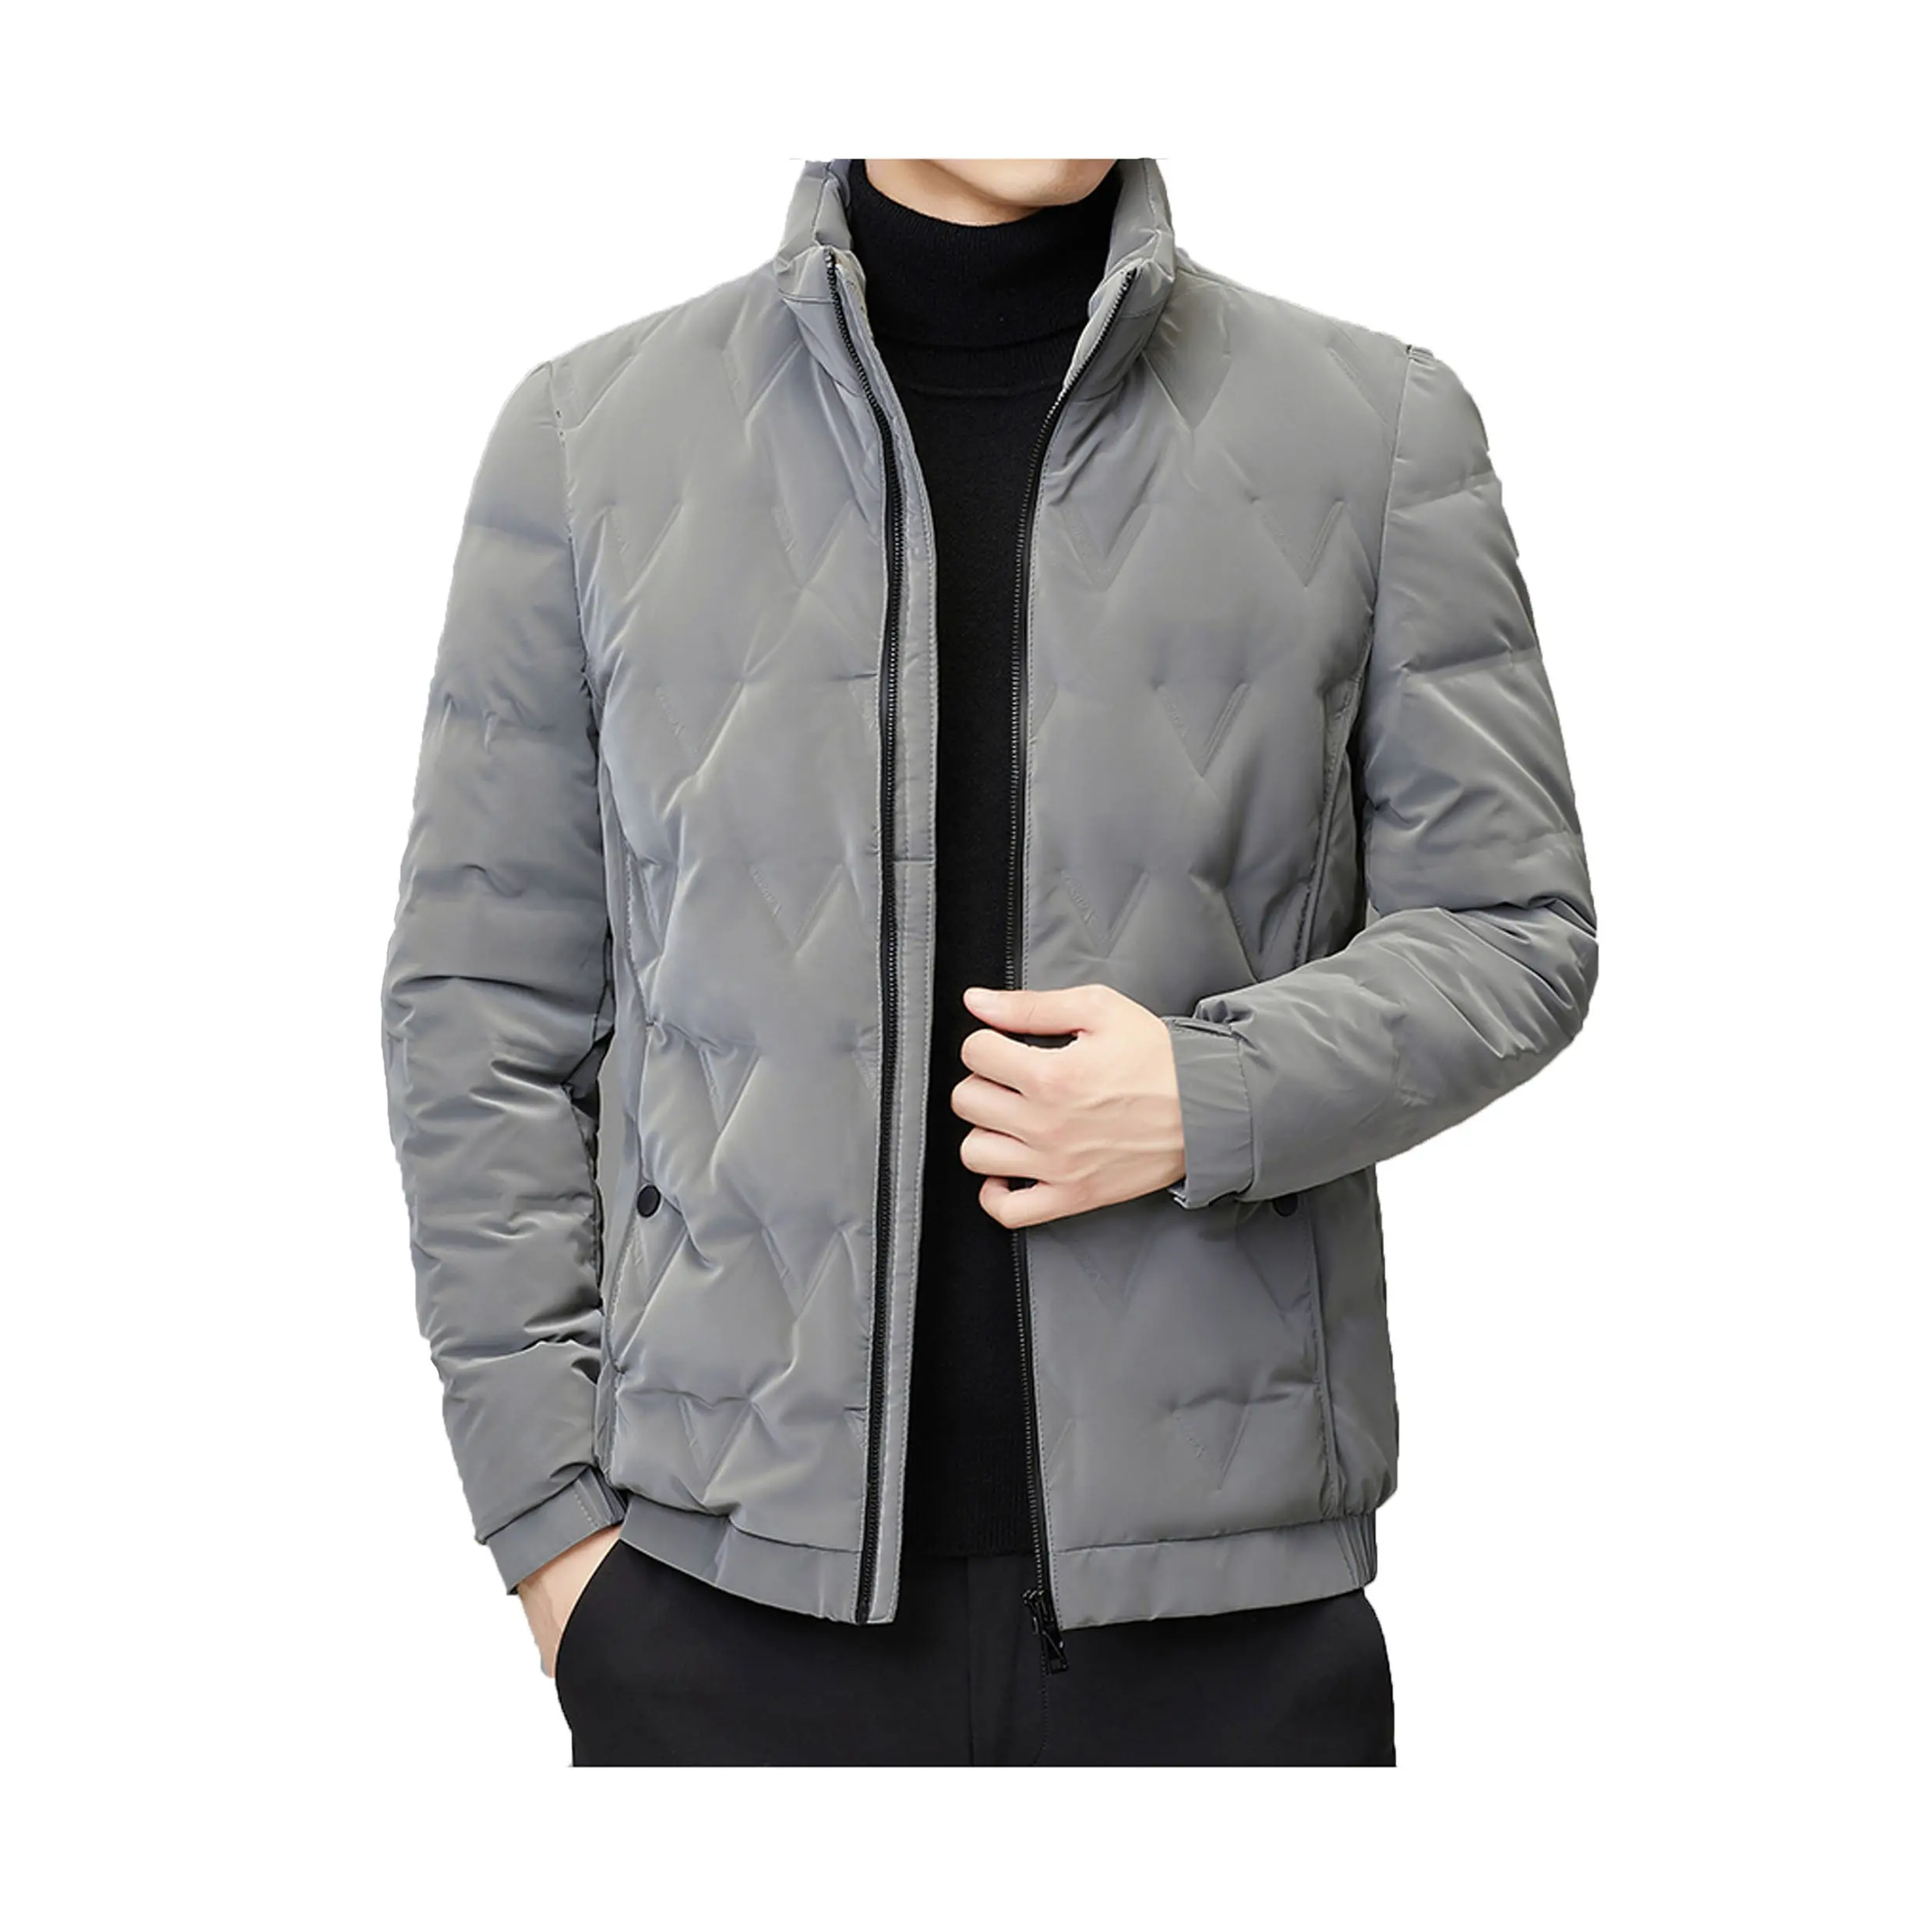 Mens Jackets 2022 Winter Stylish stand collar Men's Outerwear Puffer Down Coat padding Jacket